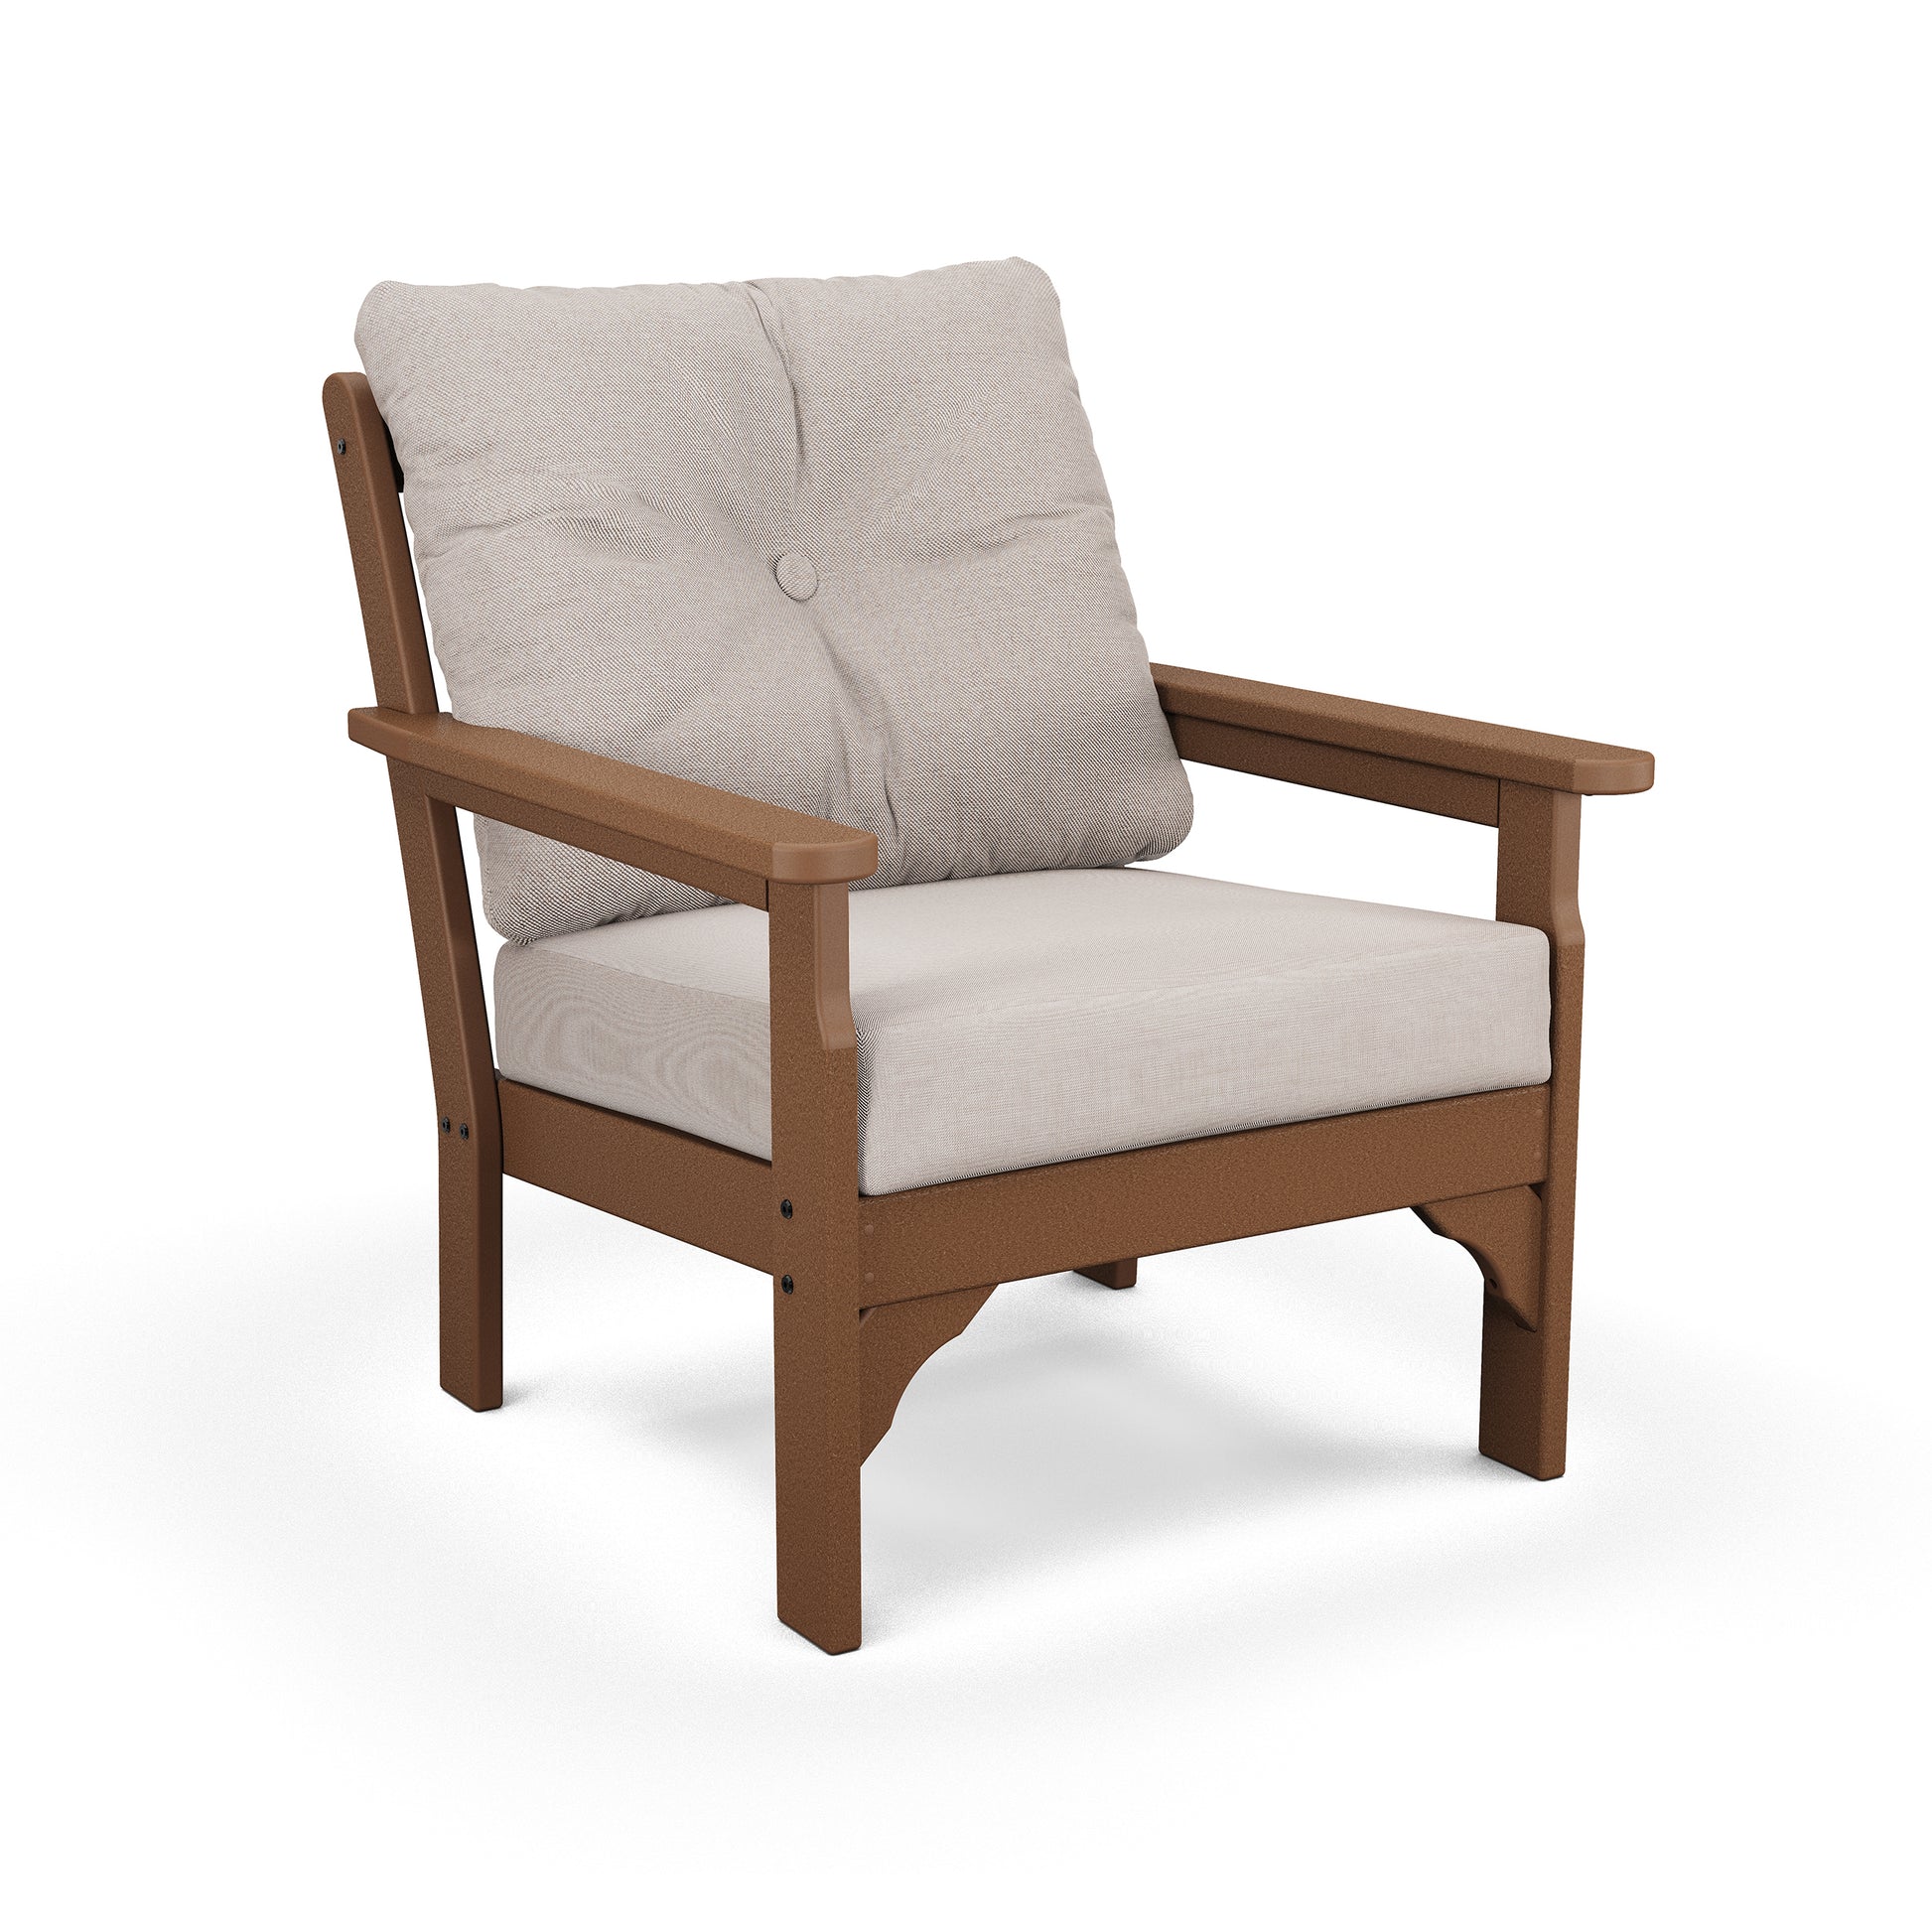 A modern POLYWOOD Vineyard Deep Seating Chair with a brown wooden frame and light beige all-weather fabric cushions on the seat and back, isolated on a white background.